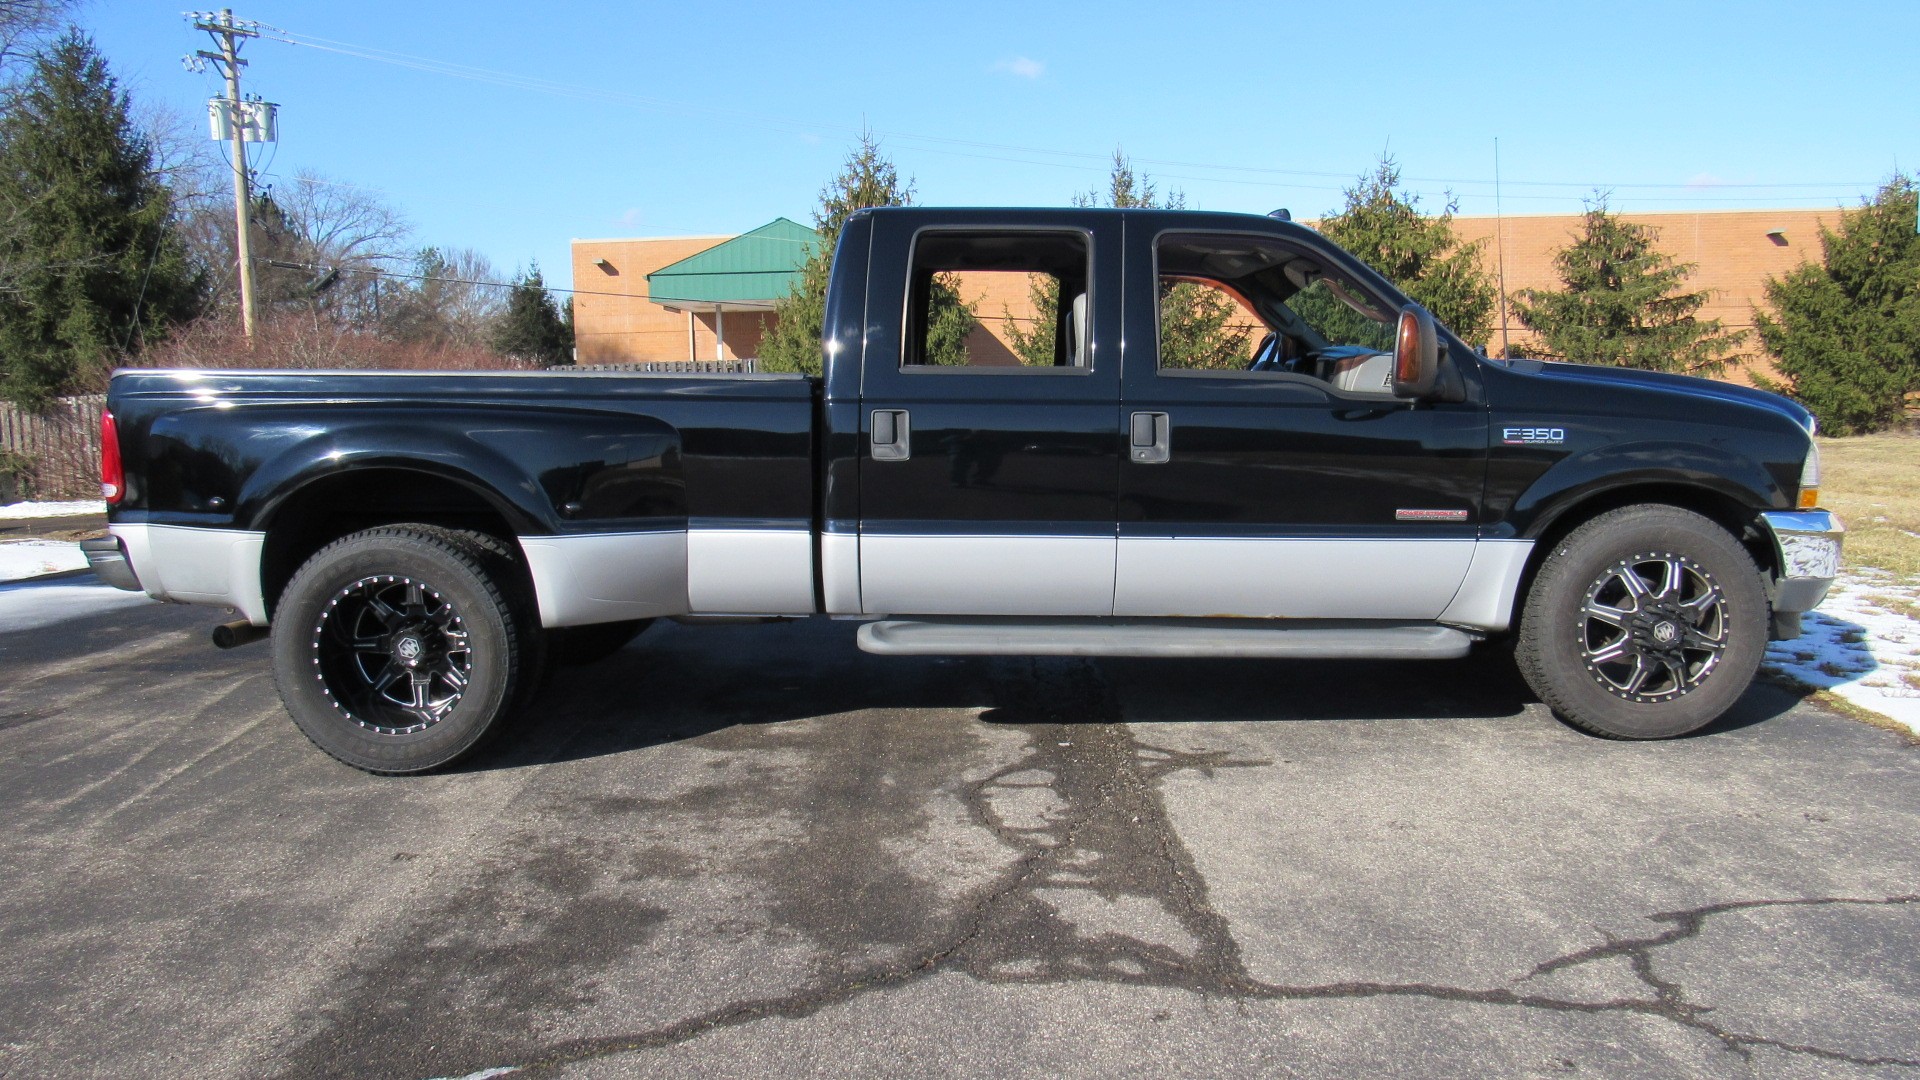 2003 F350, Dually, Rebuilt Engine, SOLD!